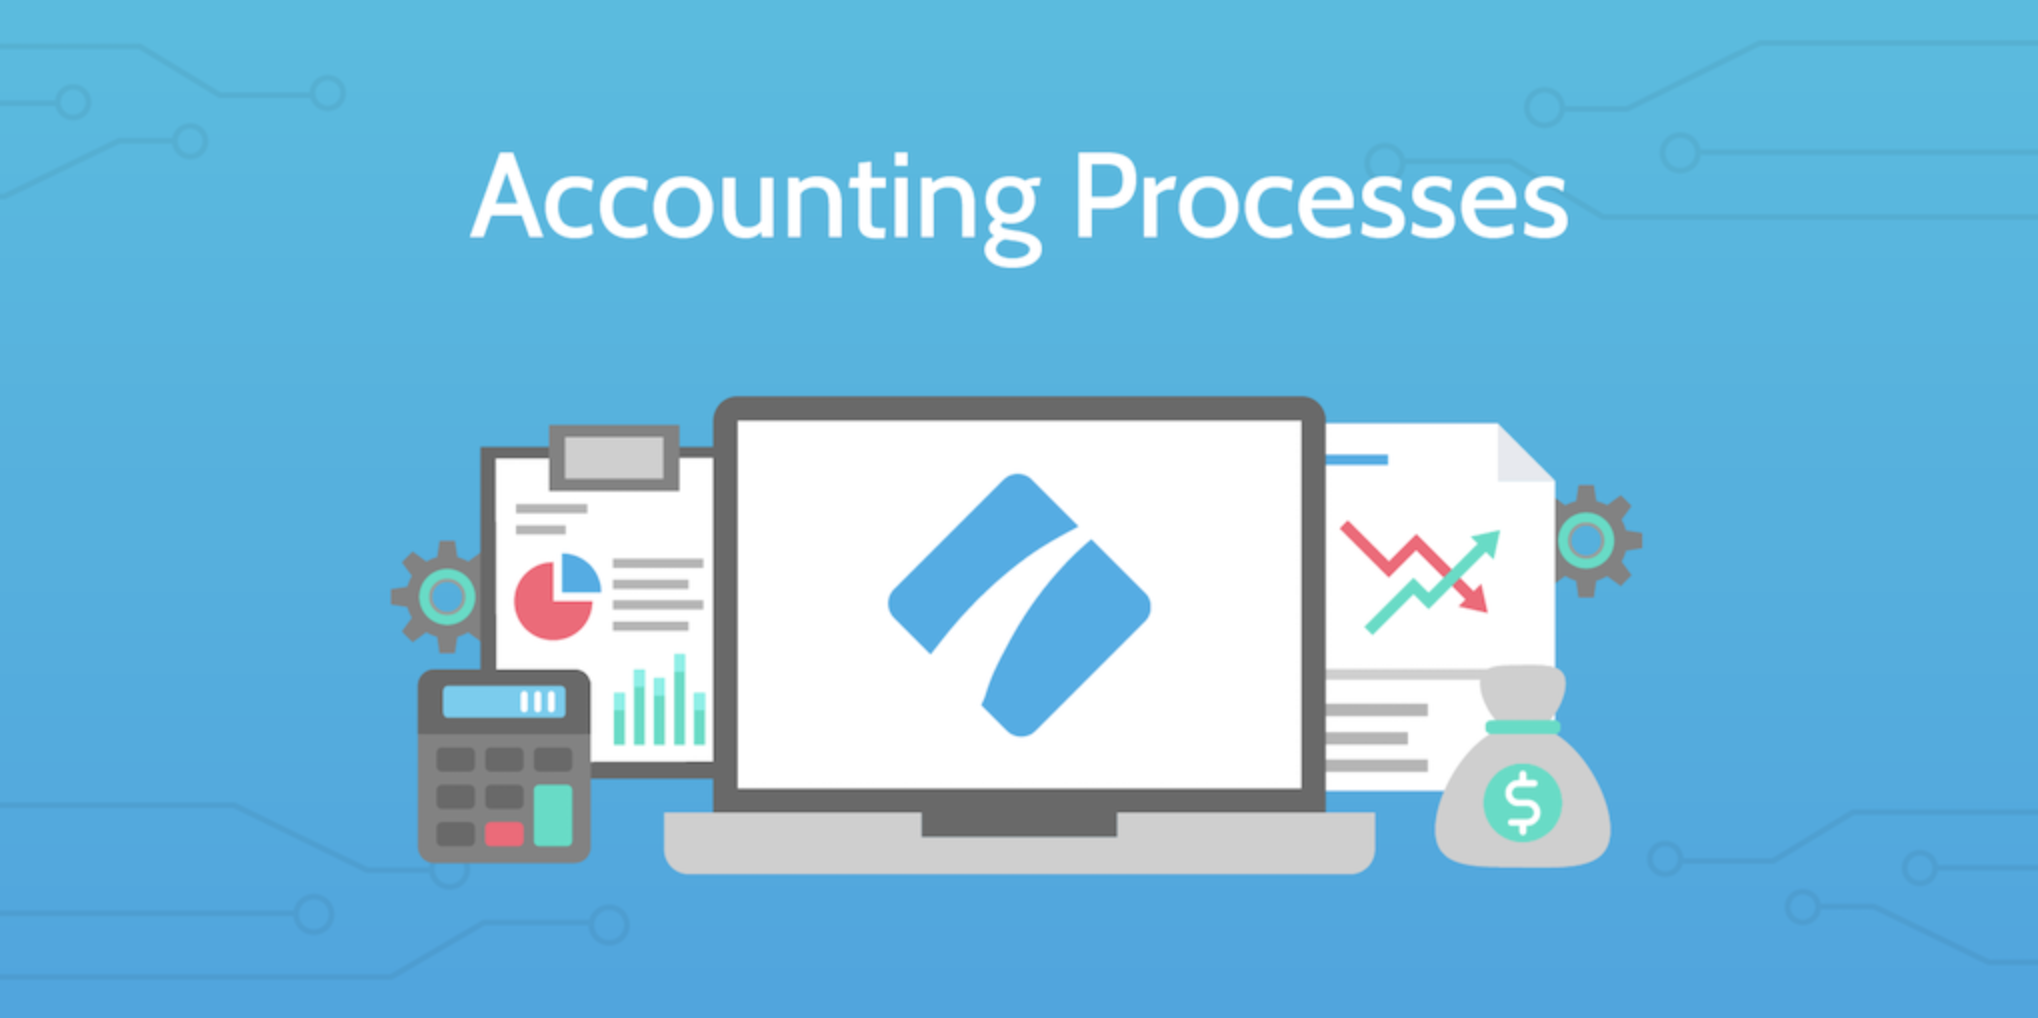 purchase order template accounting processes